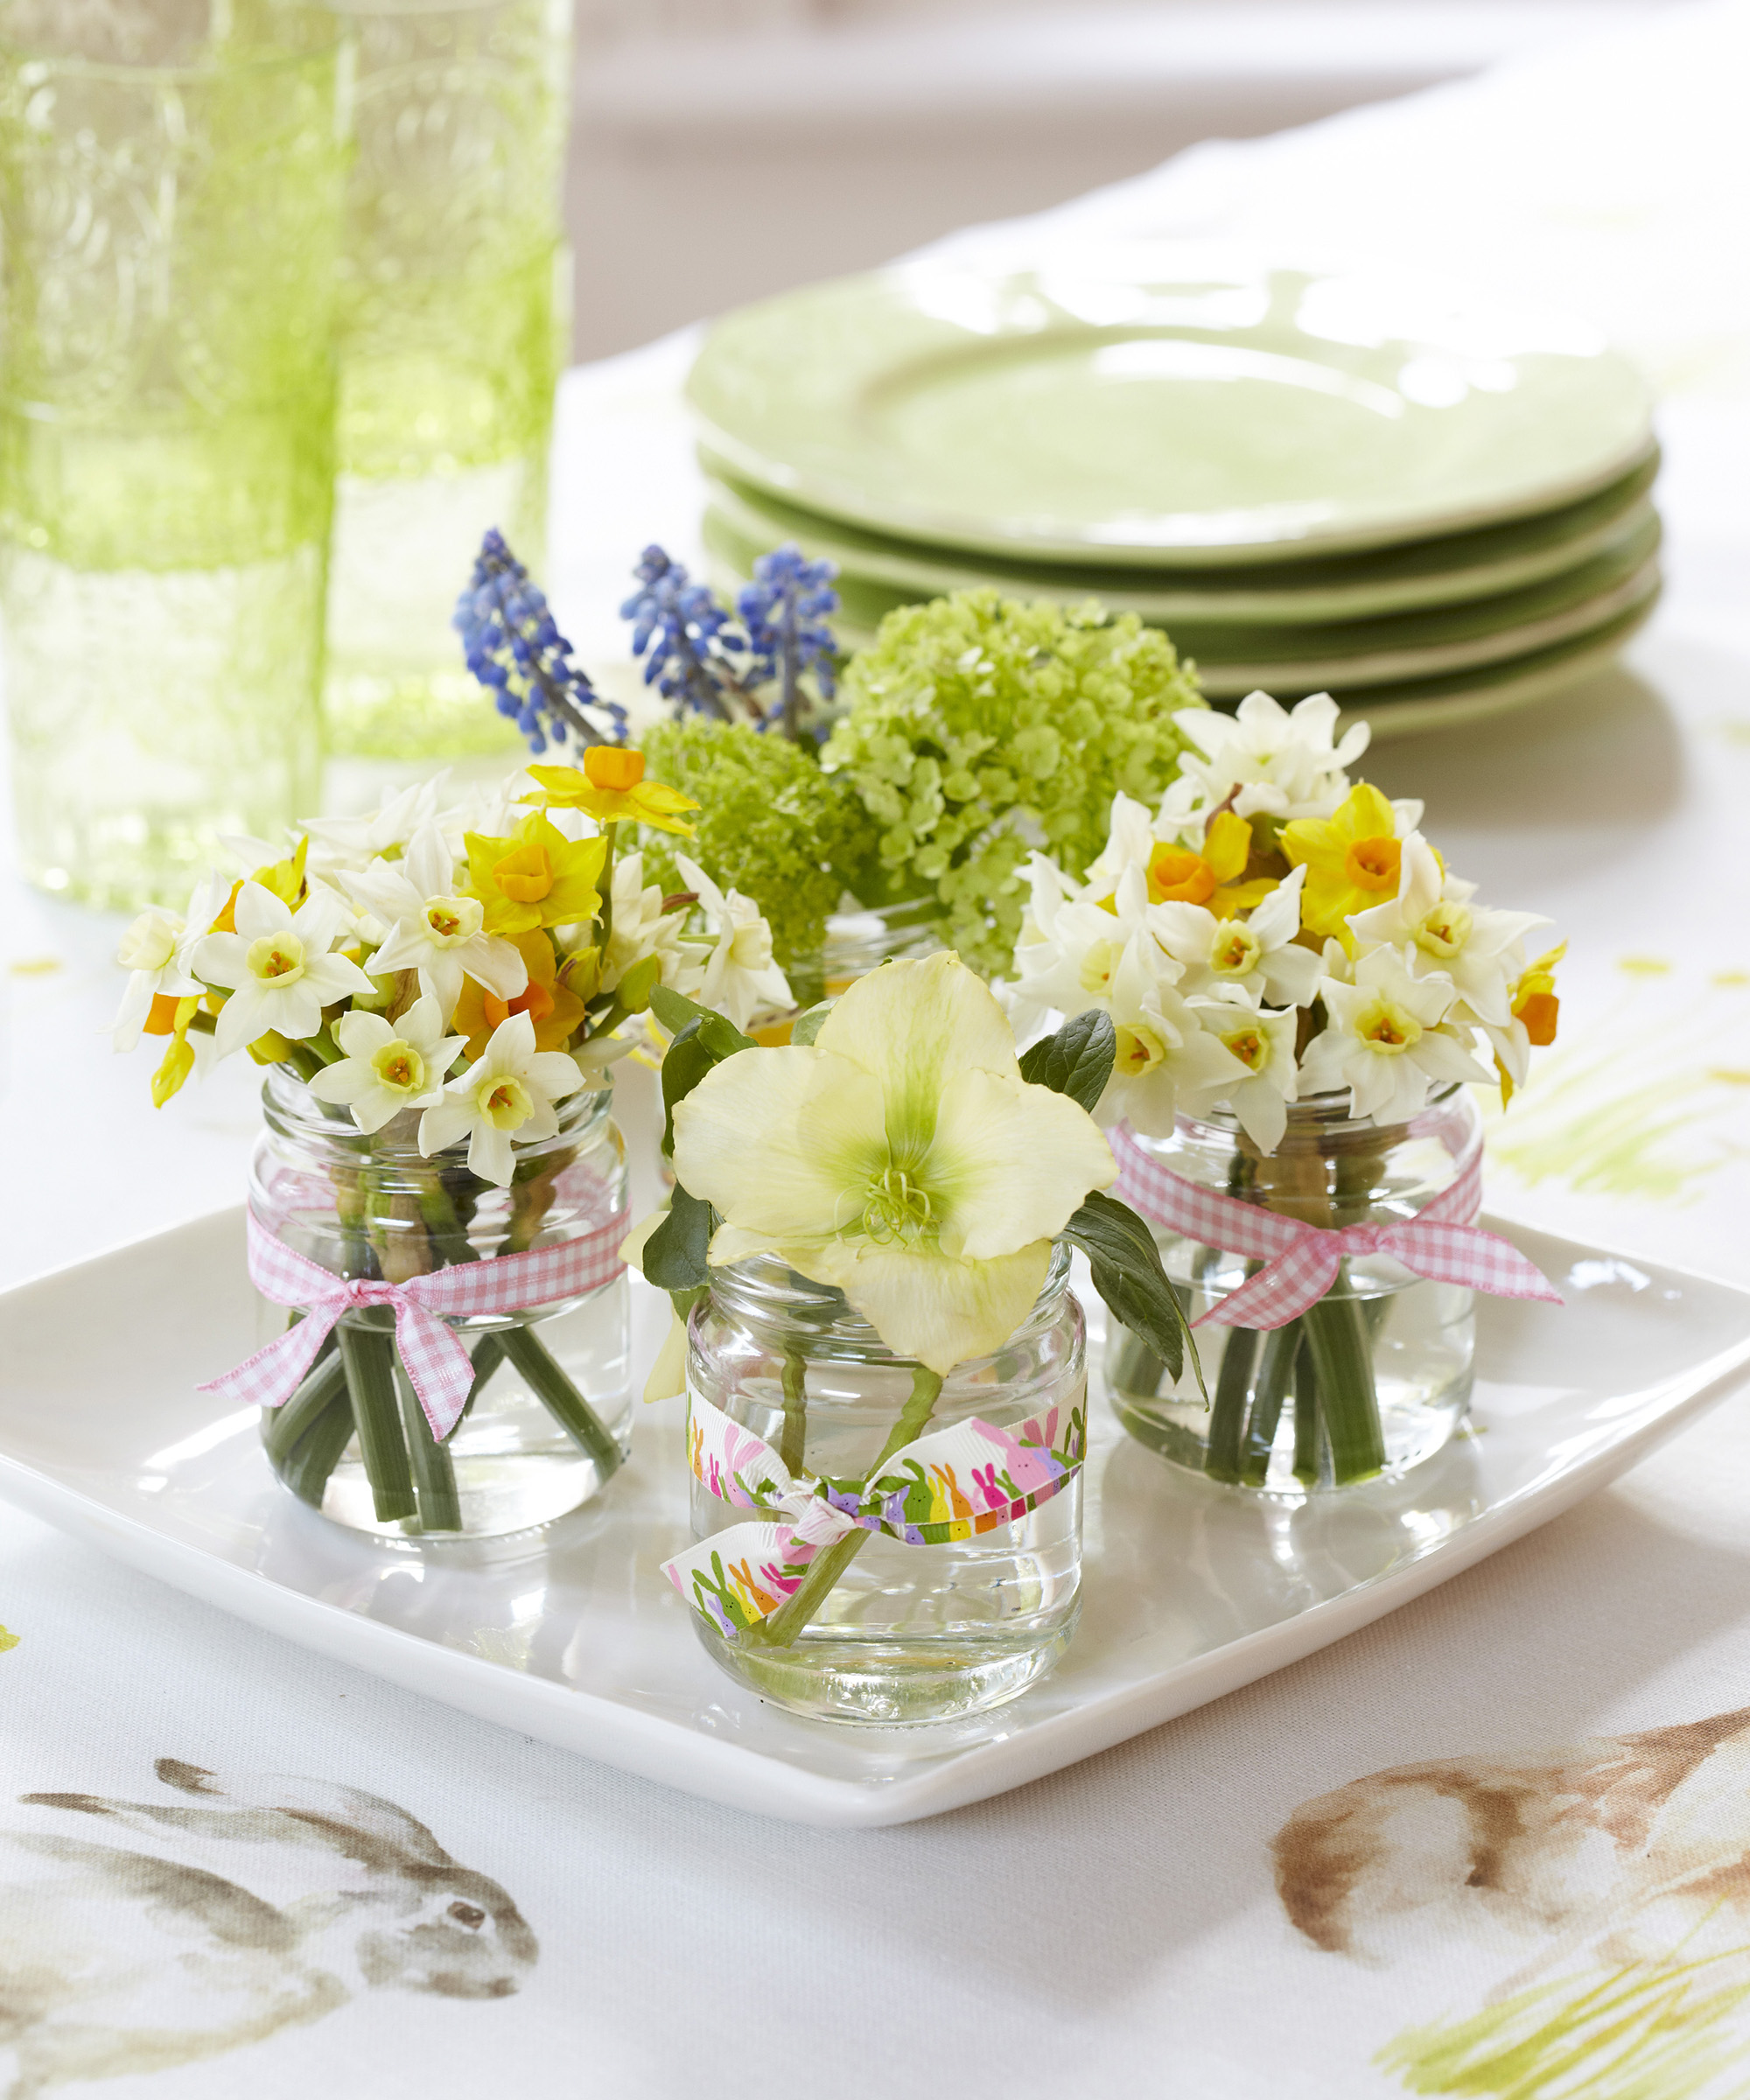 Easter table centerpiece using jars filled with spring flowers and tied with ribbon